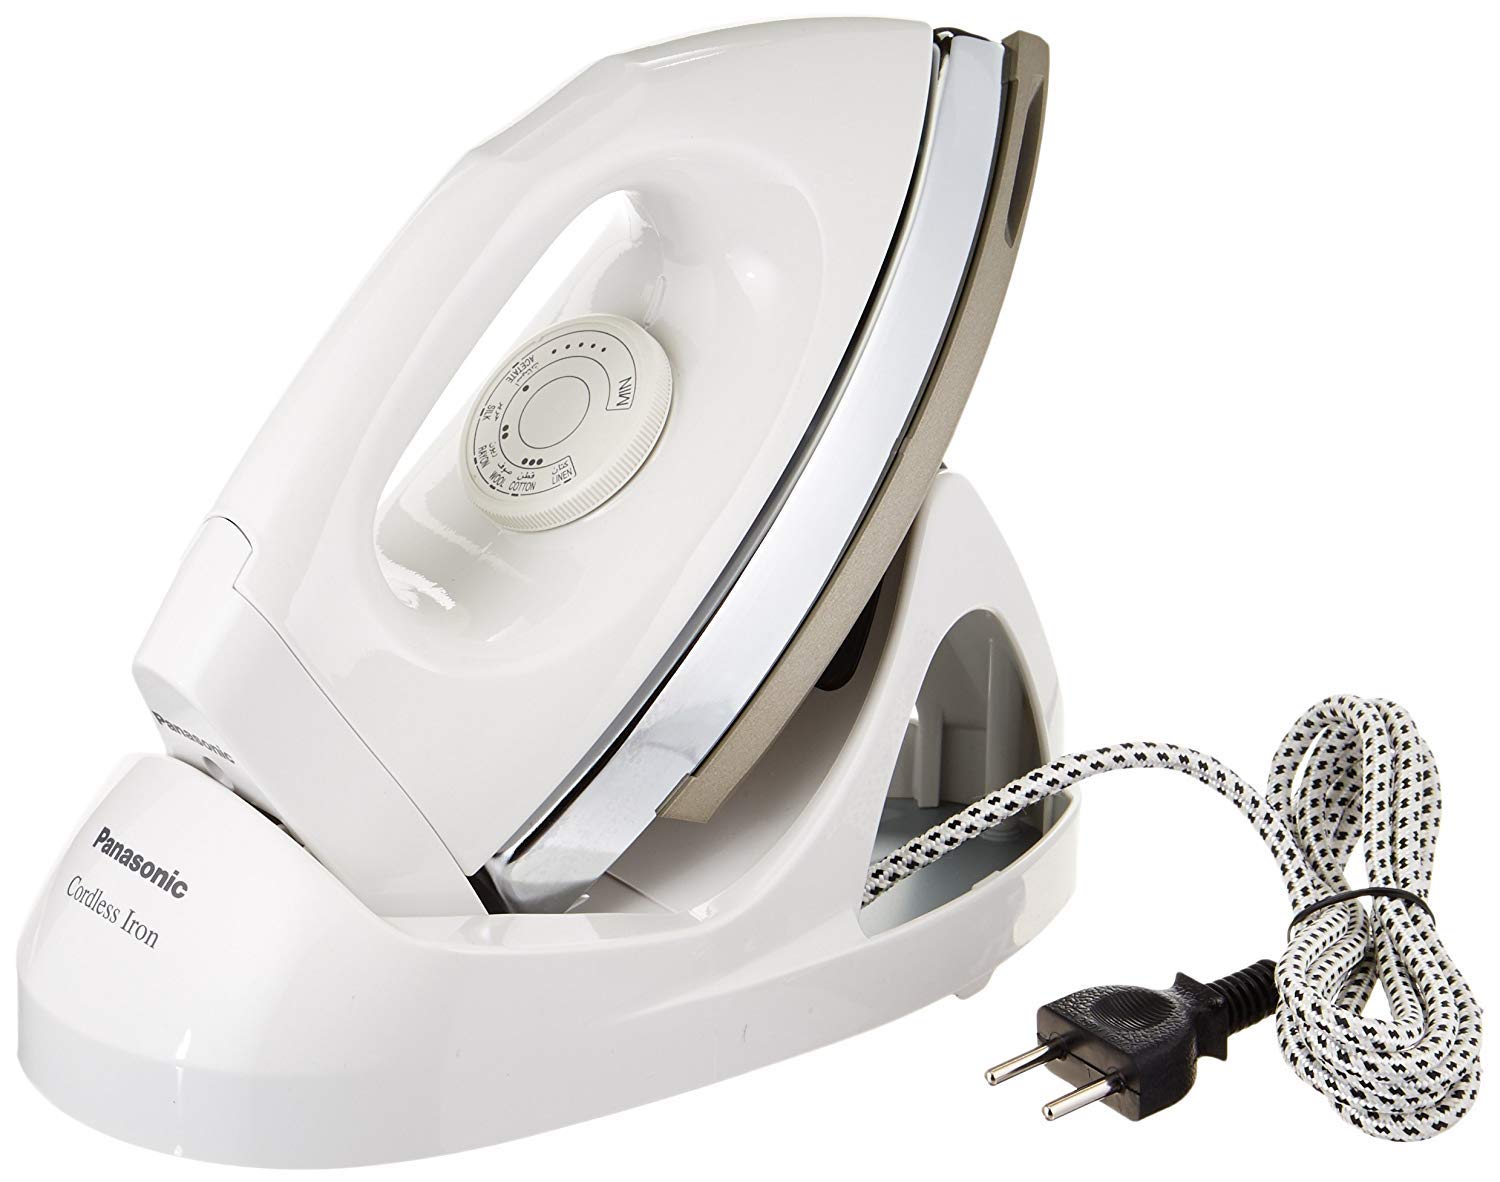 Best Cordless Irons in Singapore